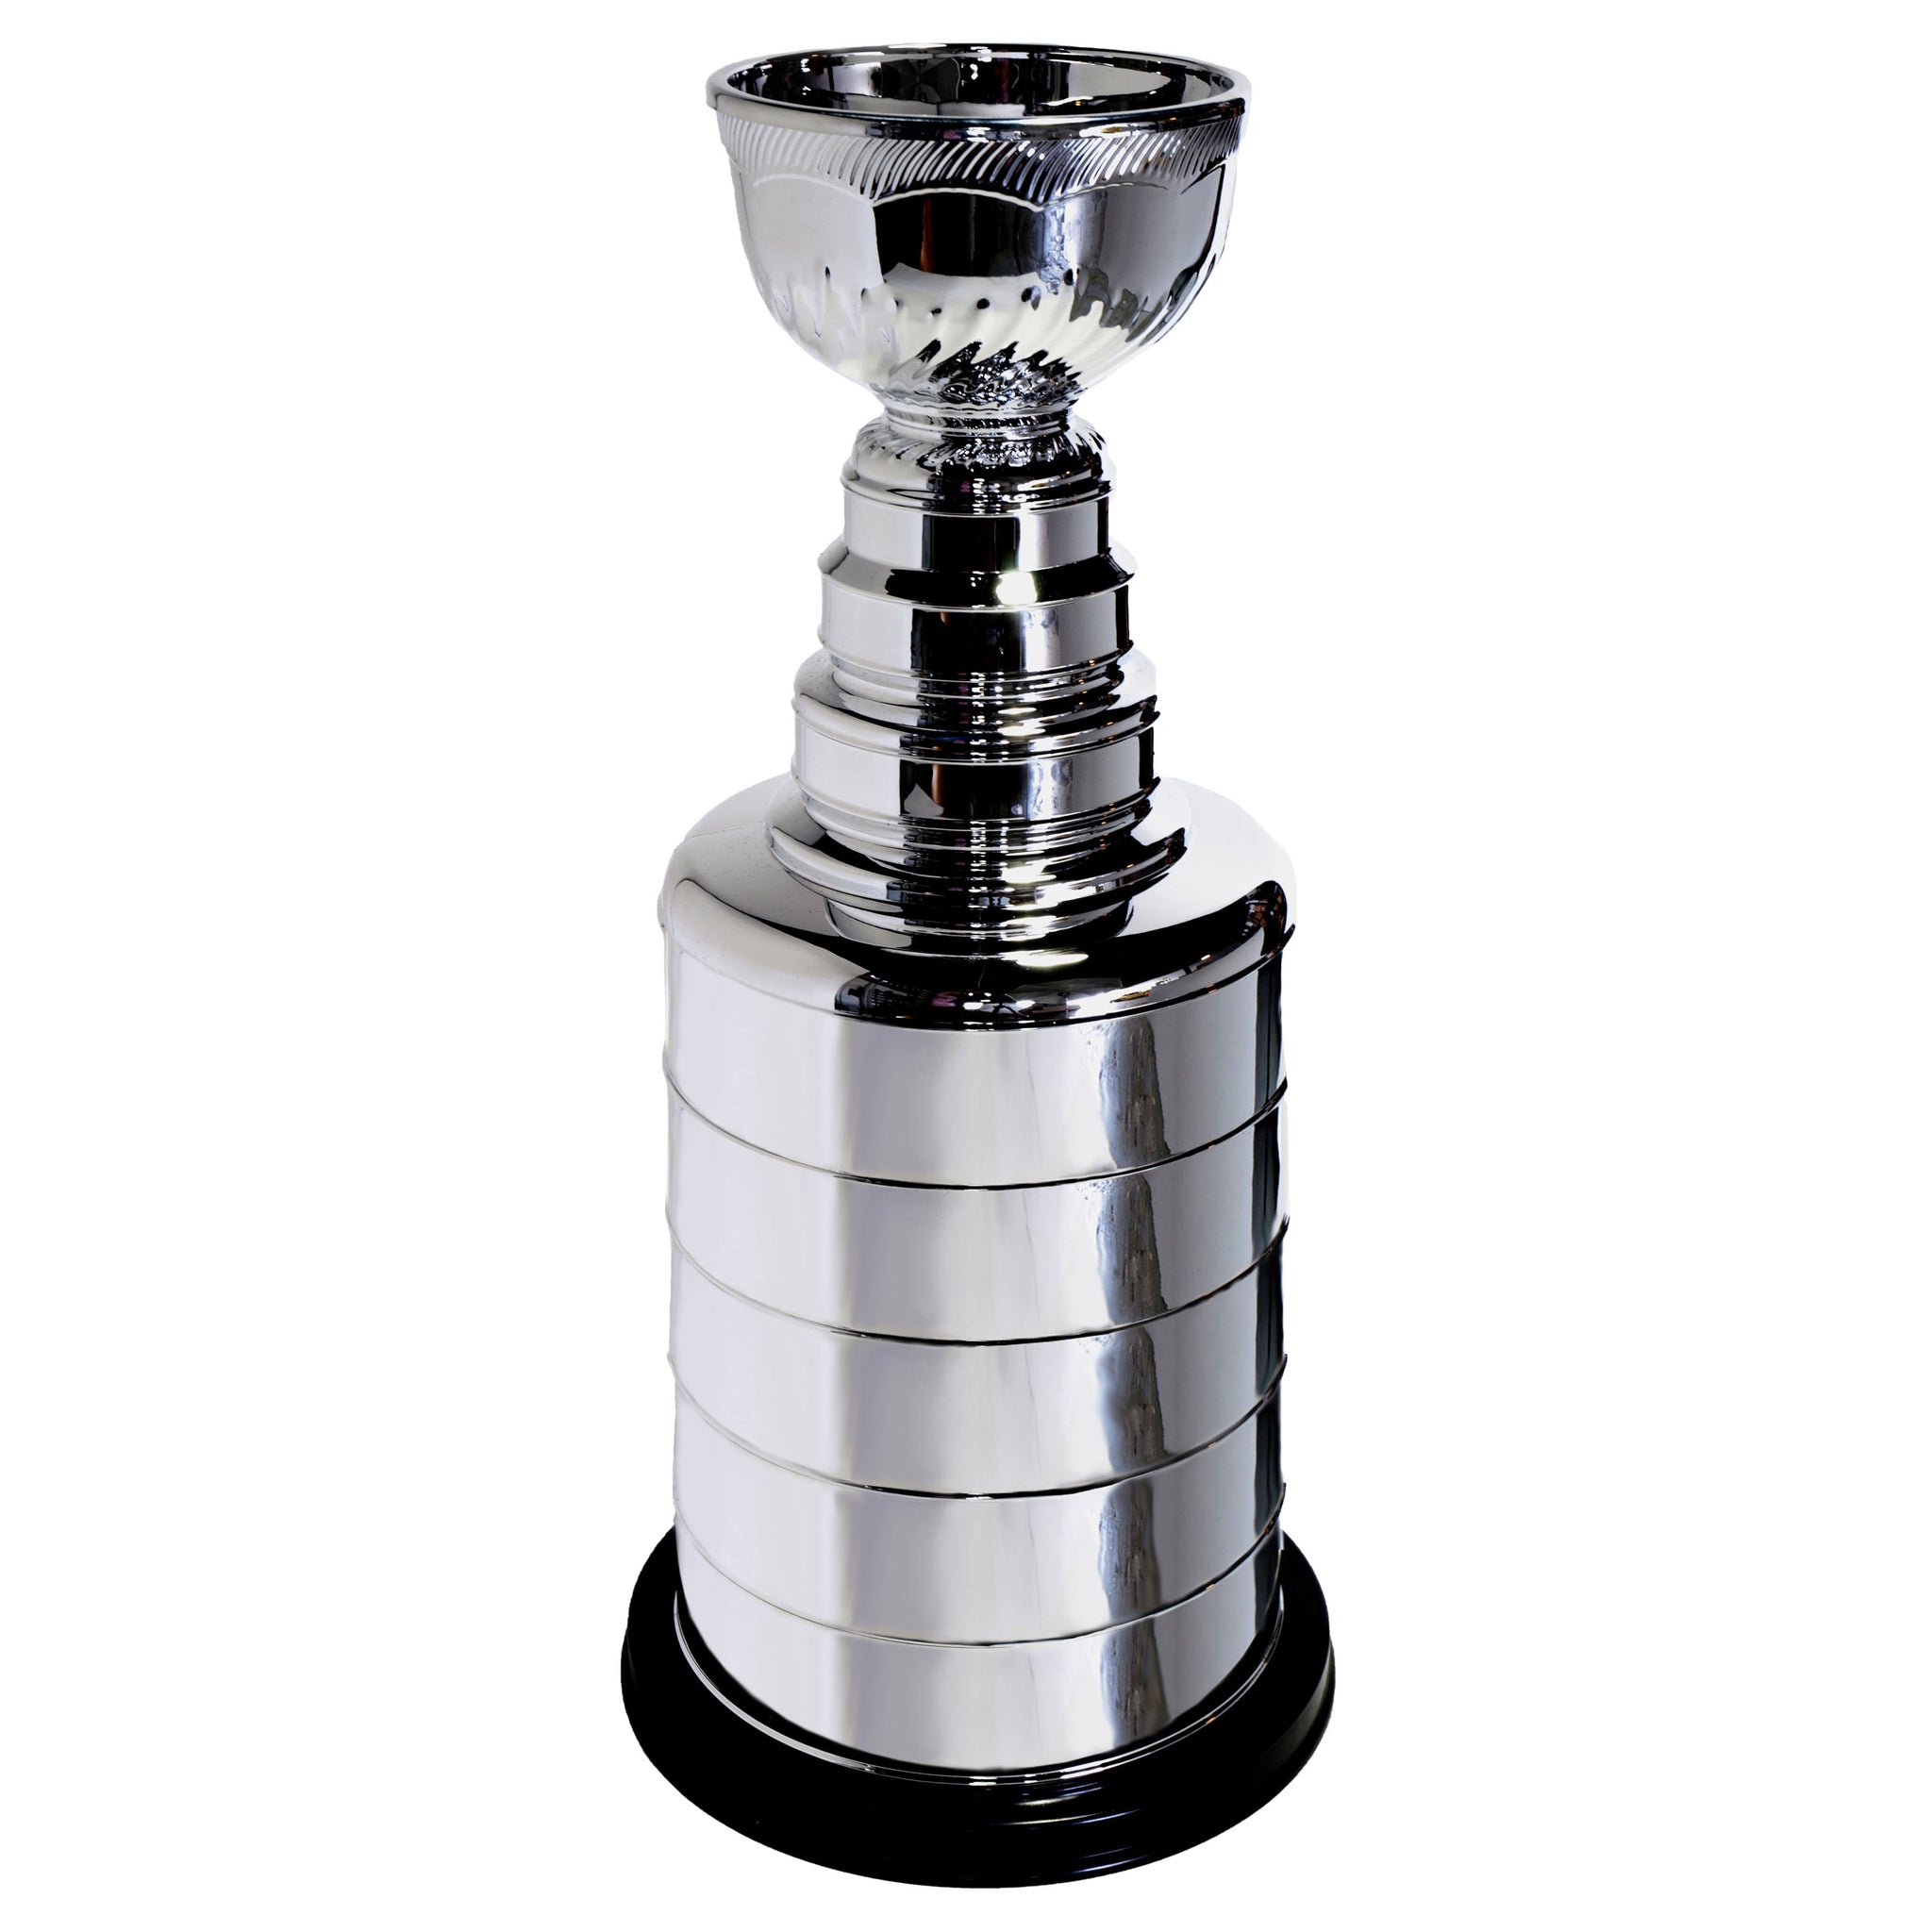 NHL Officially Licensed 25 Replica Stanley Cup Trophy